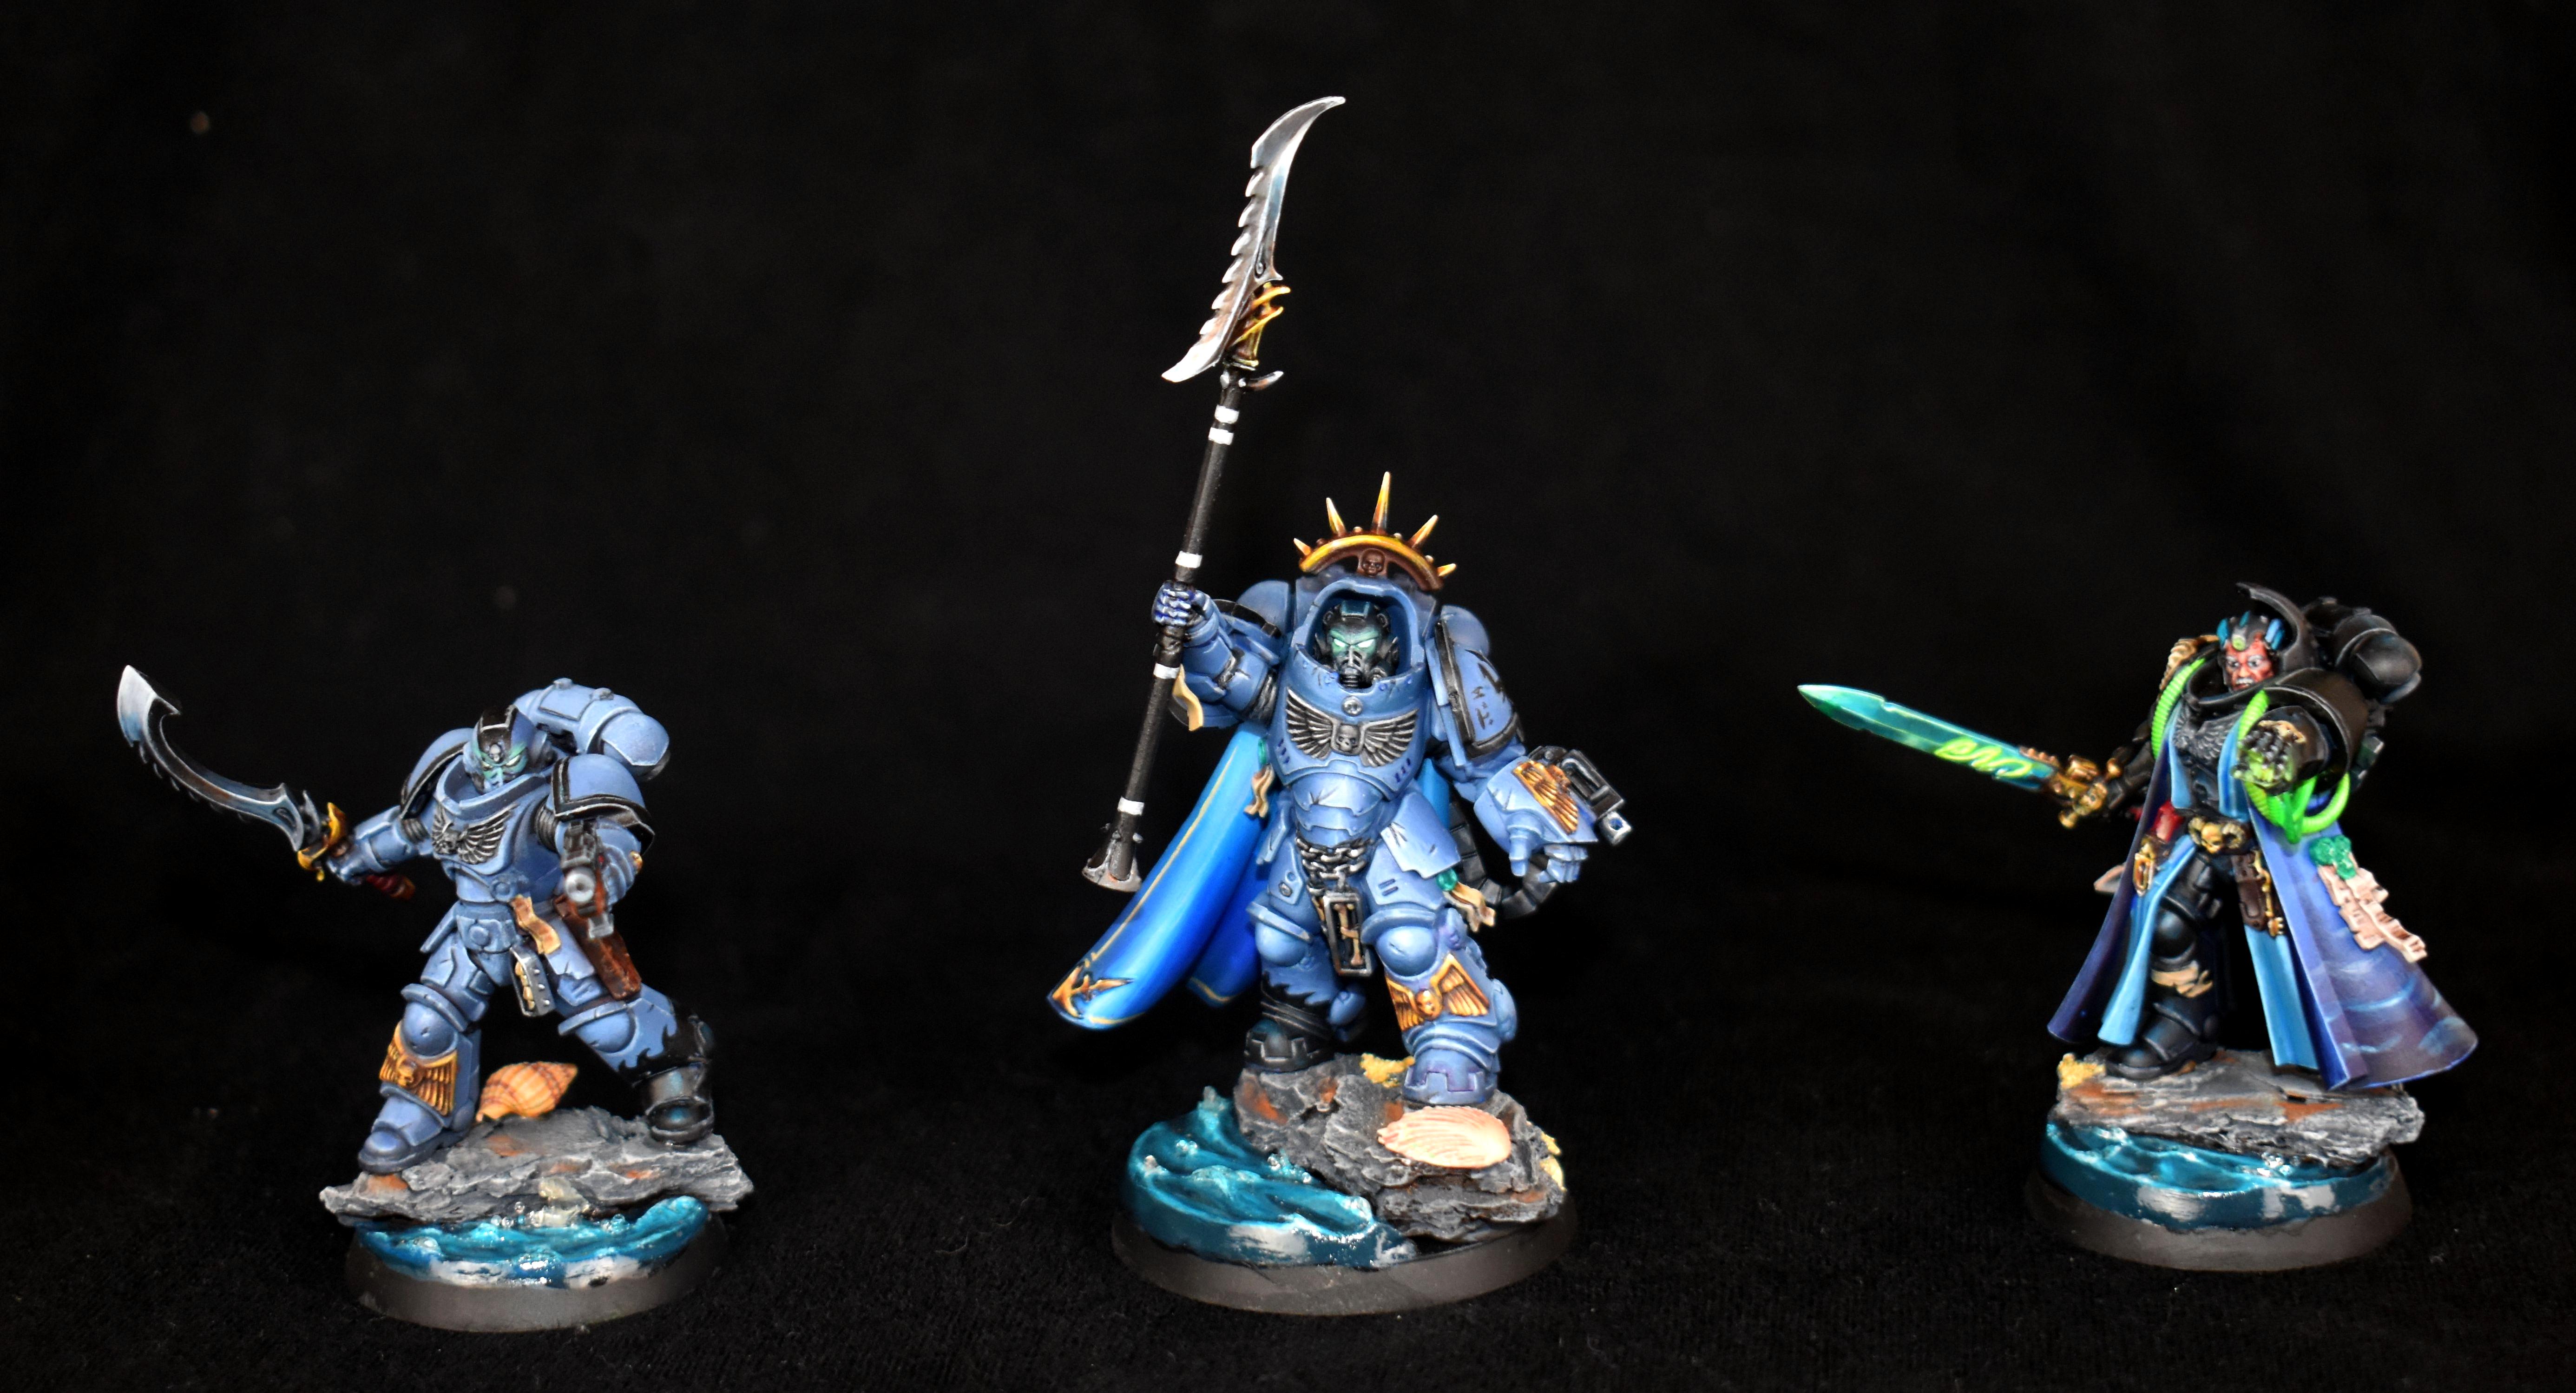 Base, Object Source Lighting, Space Marines, Spears, Water Effects